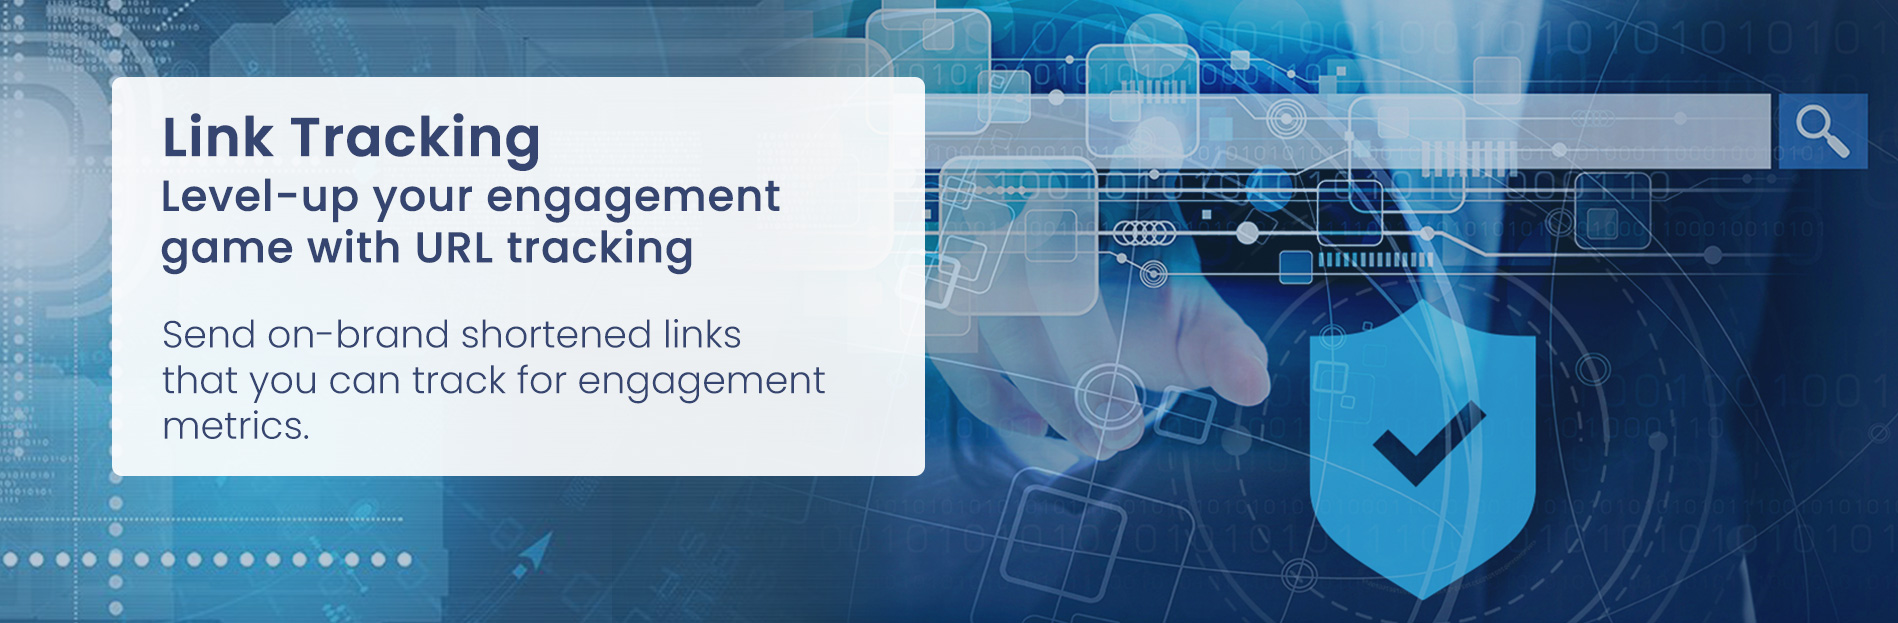 360 Sms App Link Tracking- Level up your engagement game with URL tracking